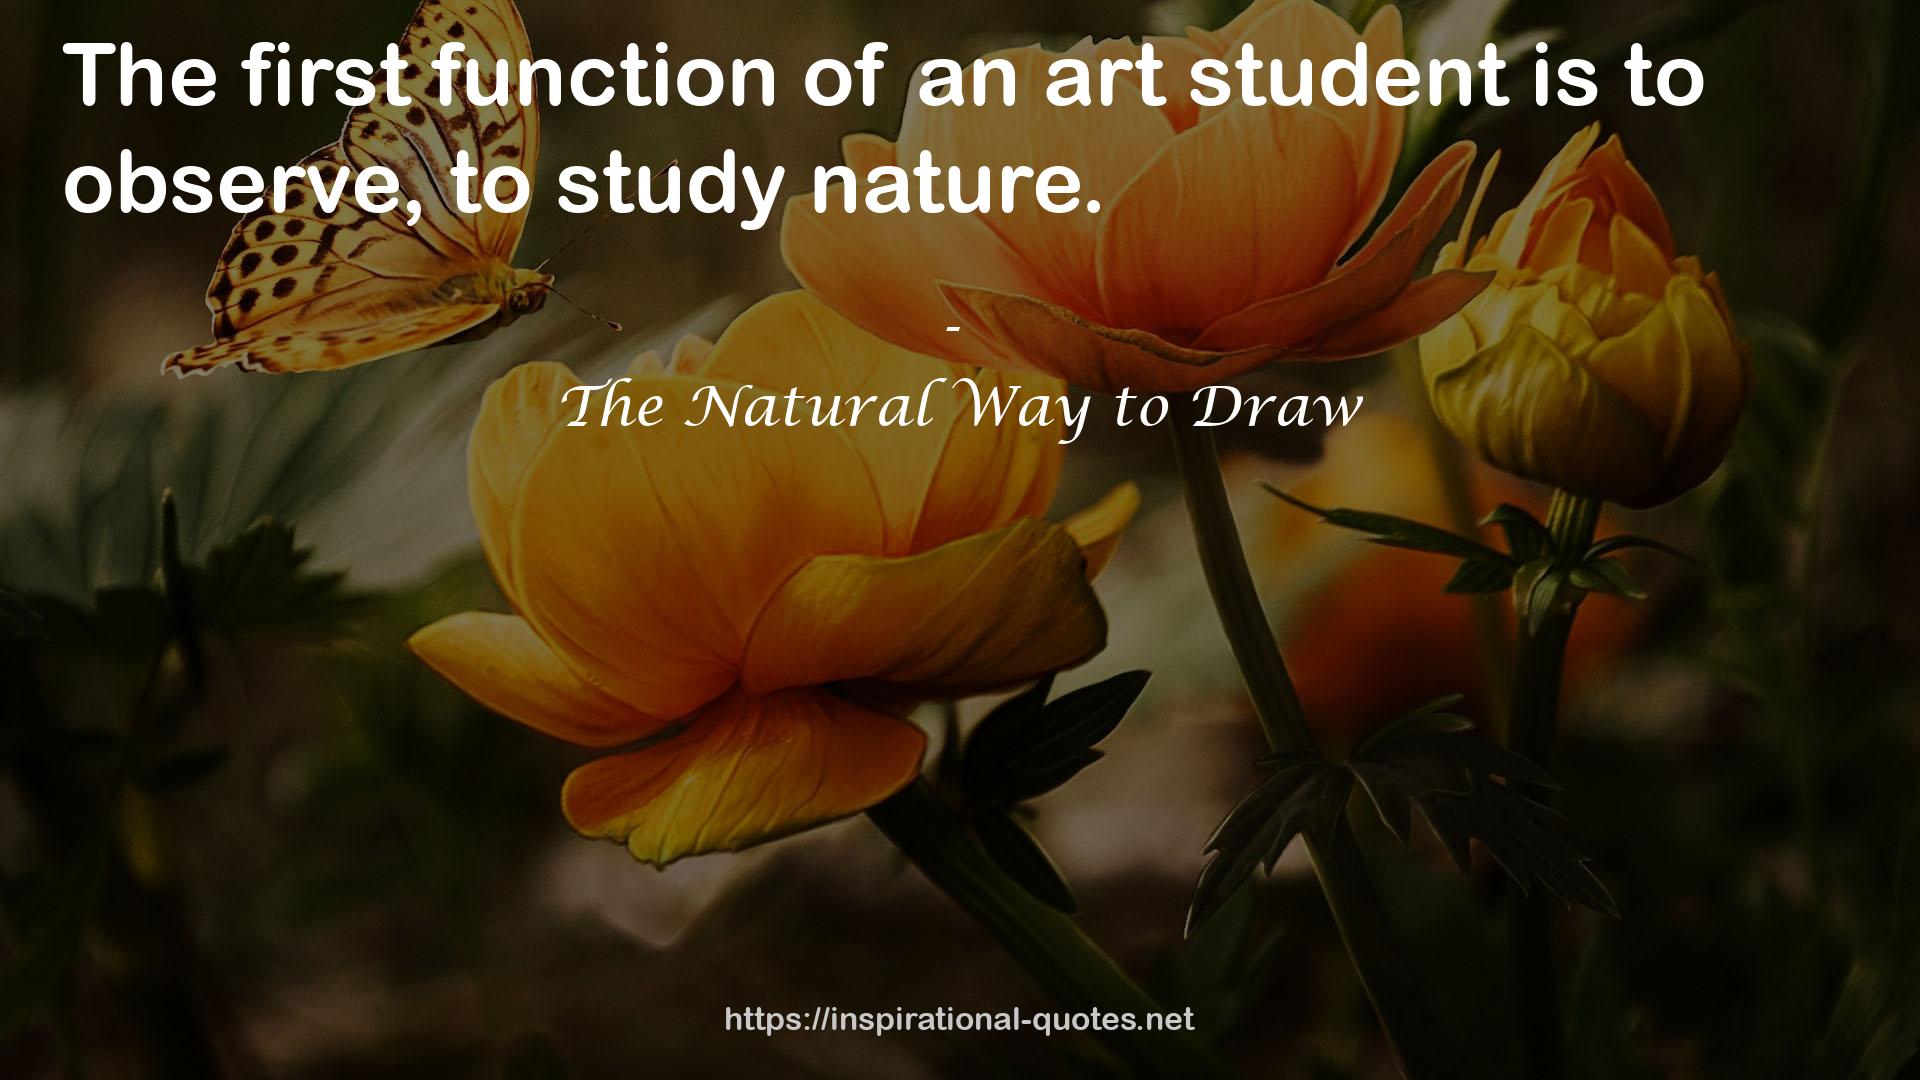 The Natural Way to Draw QUOTES